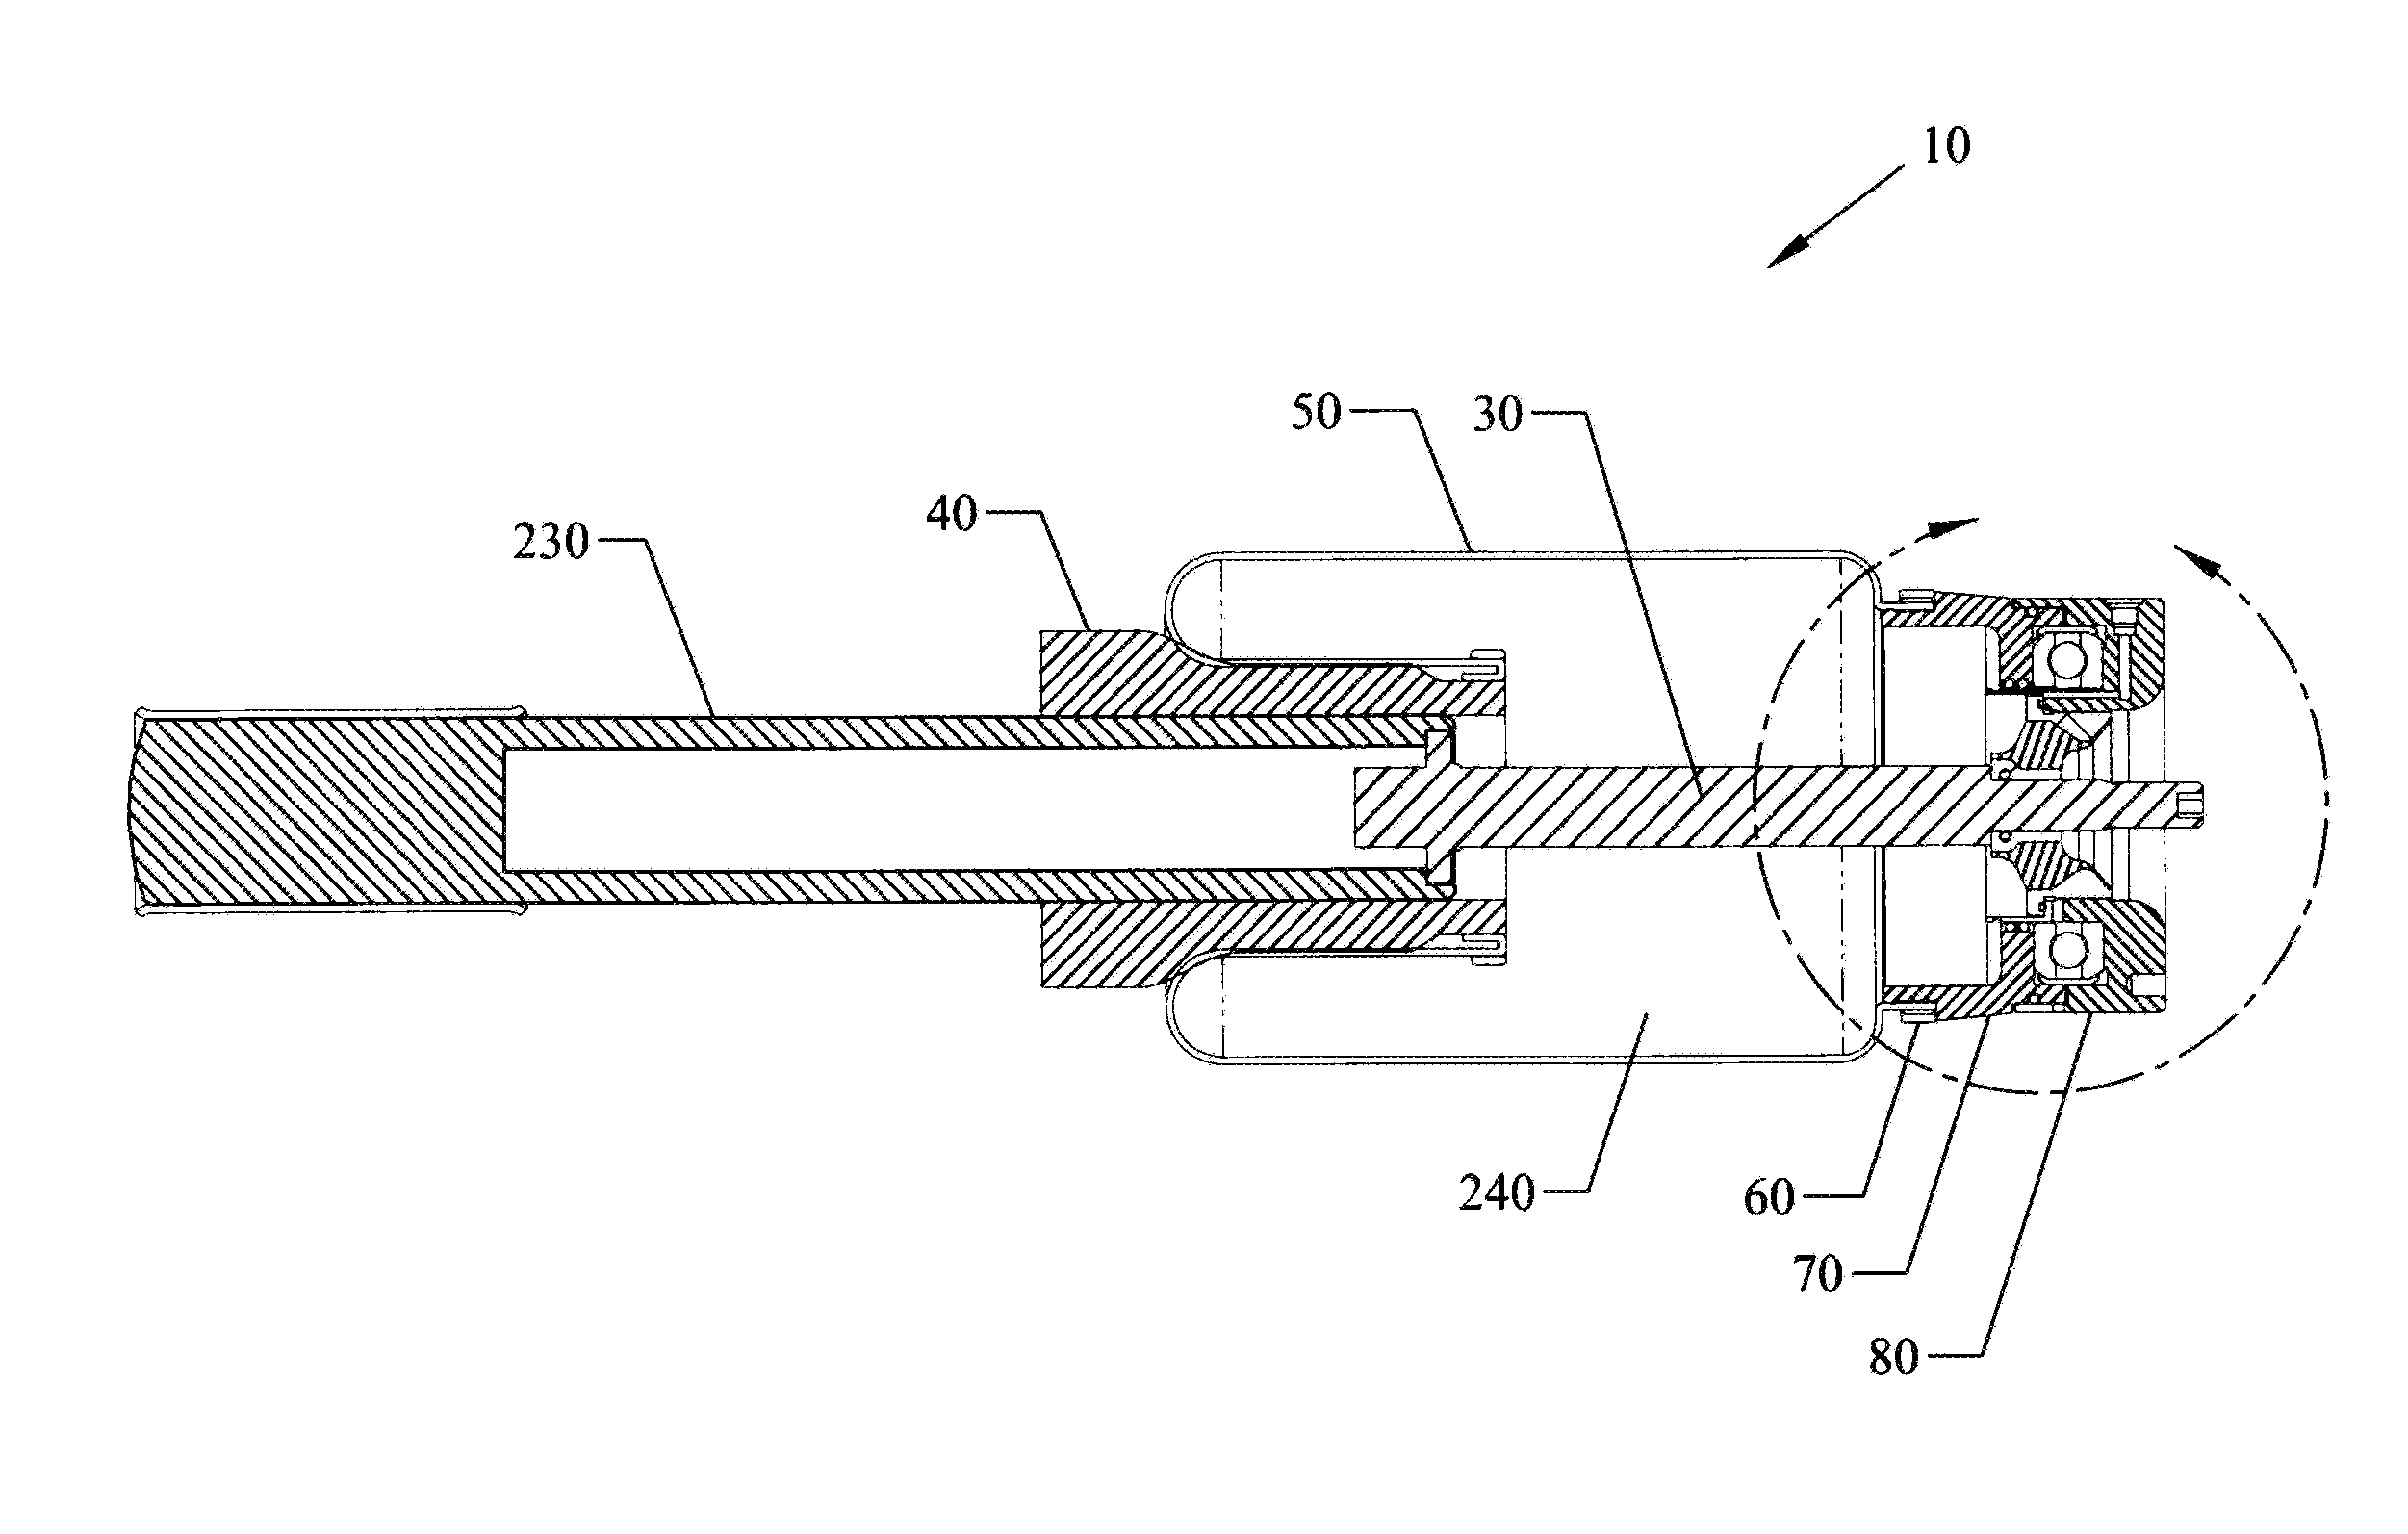 Mount and bearing for shock absorber